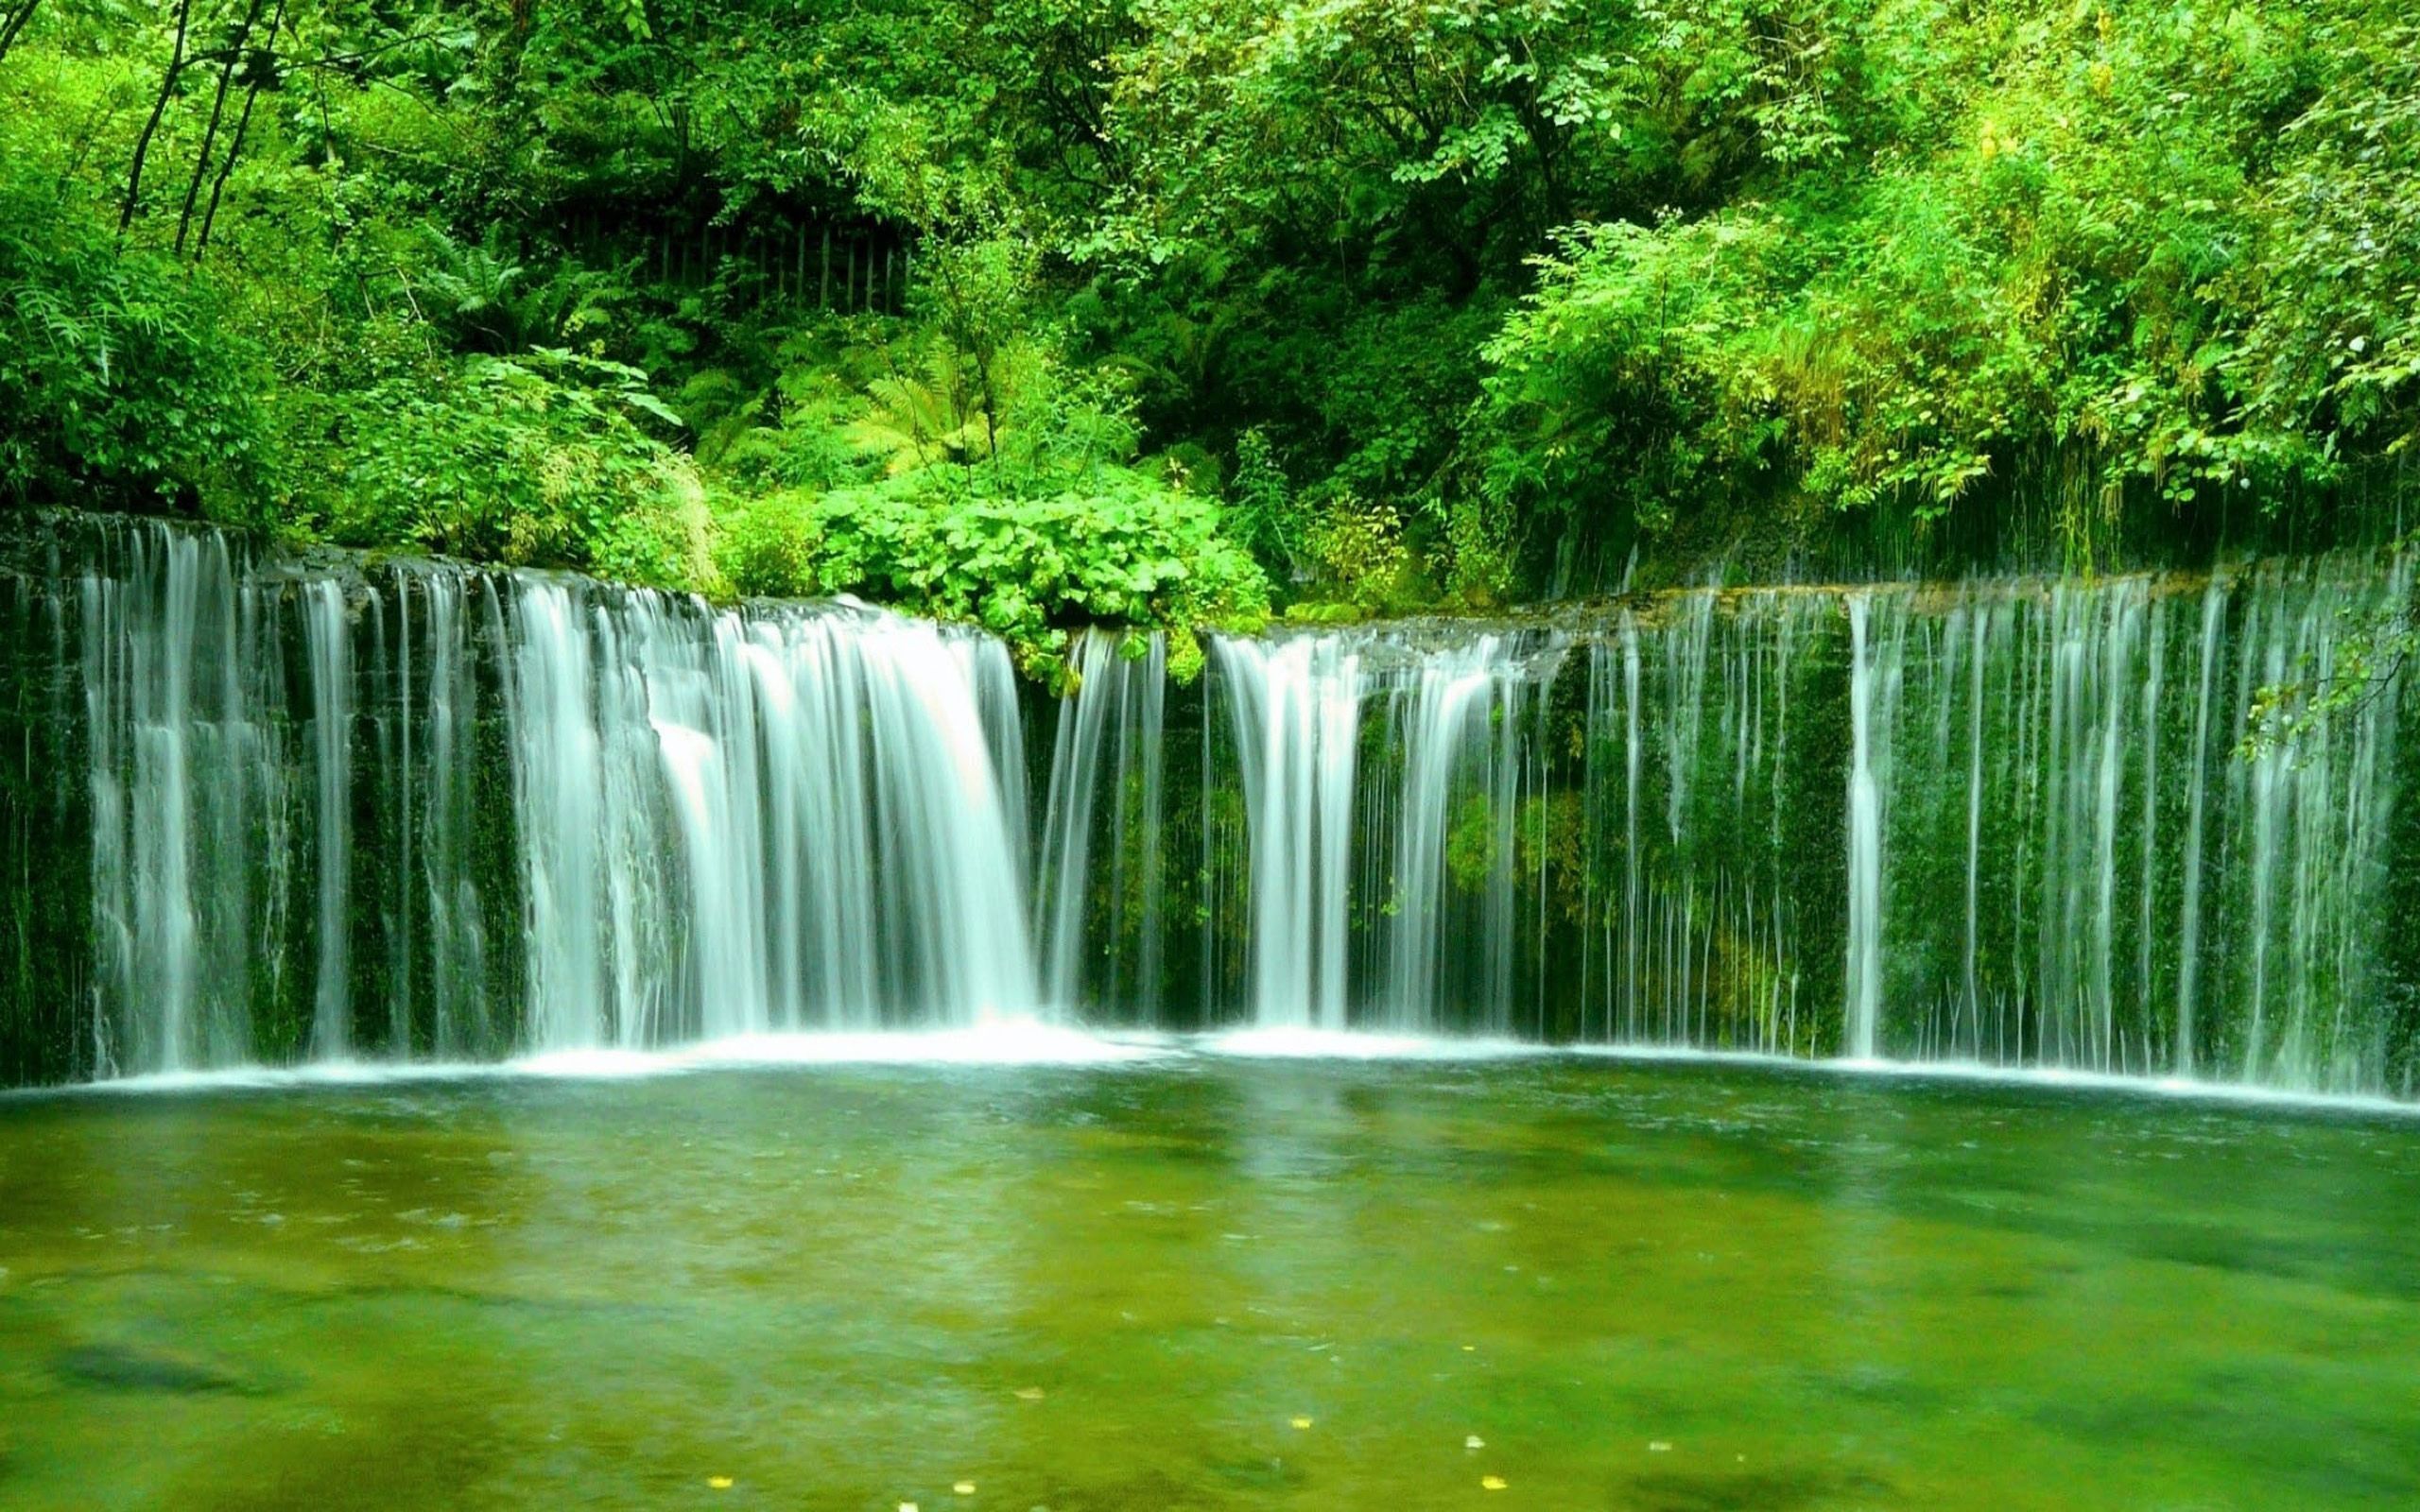 scenery live wallpaper,water resources,waterfall,body of water,natural landscape,nature